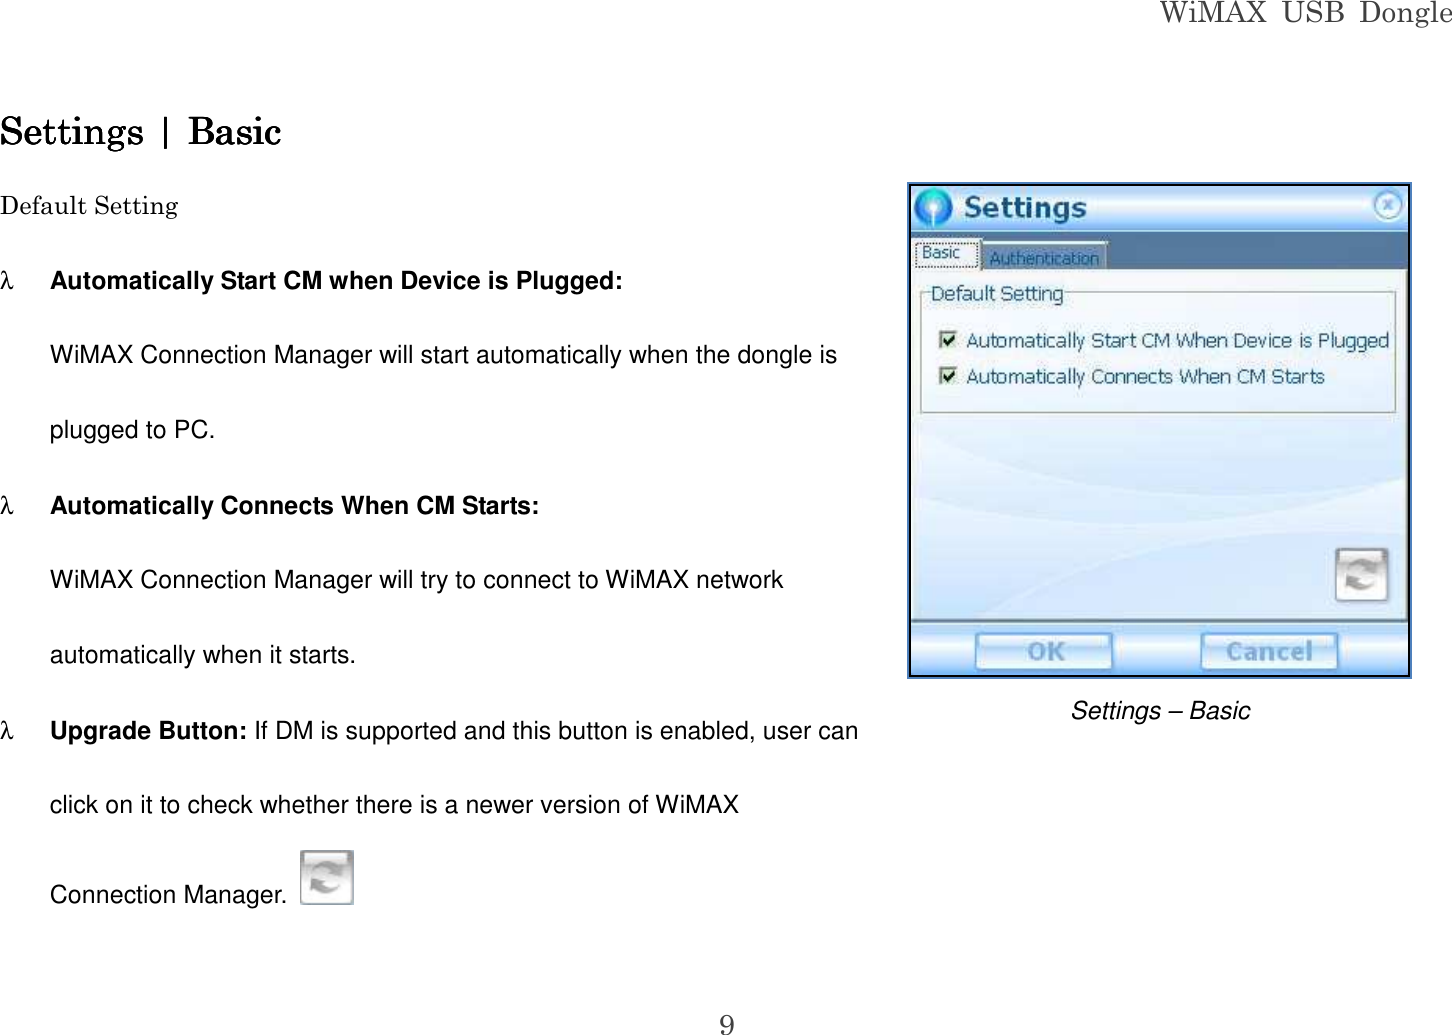 WiMAX  USB  Dongle  9 Settings | BasicSettings | BasicSettings | BasicSettings | Basic    Default Setting λ Automatically Start CM when Device is Plugged: WiMAX Connection Manager will start automatically when the dongle is plugged to PC. λ Automatically Connects When CM Starts: WiMAX Connection Manager will try to connect to WiMAX network automatically when it starts. λ Upgrade Button: If DM is supported and this button is enabled, user can click on it to check whether there is a newer version of WiMAX Connection Manager.    Settings – Basic 